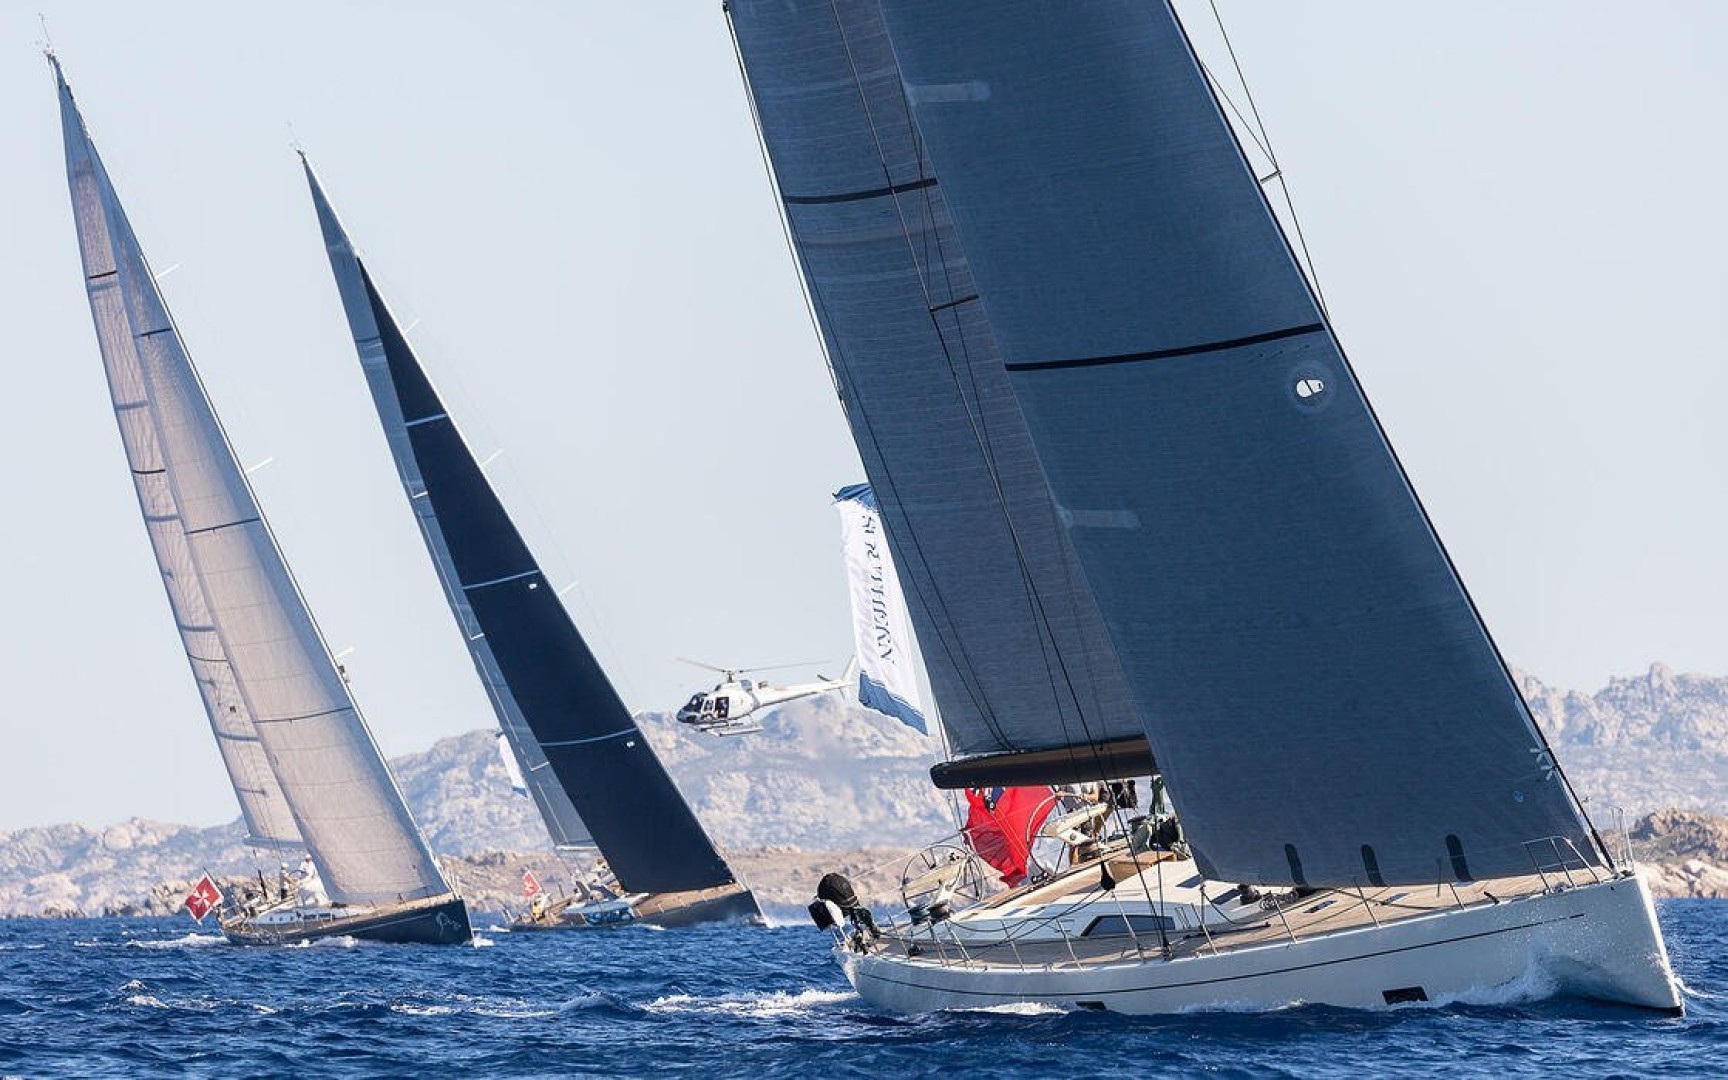 The Southern Wind Family Rendezvous is about to begin in Porto Rotondo